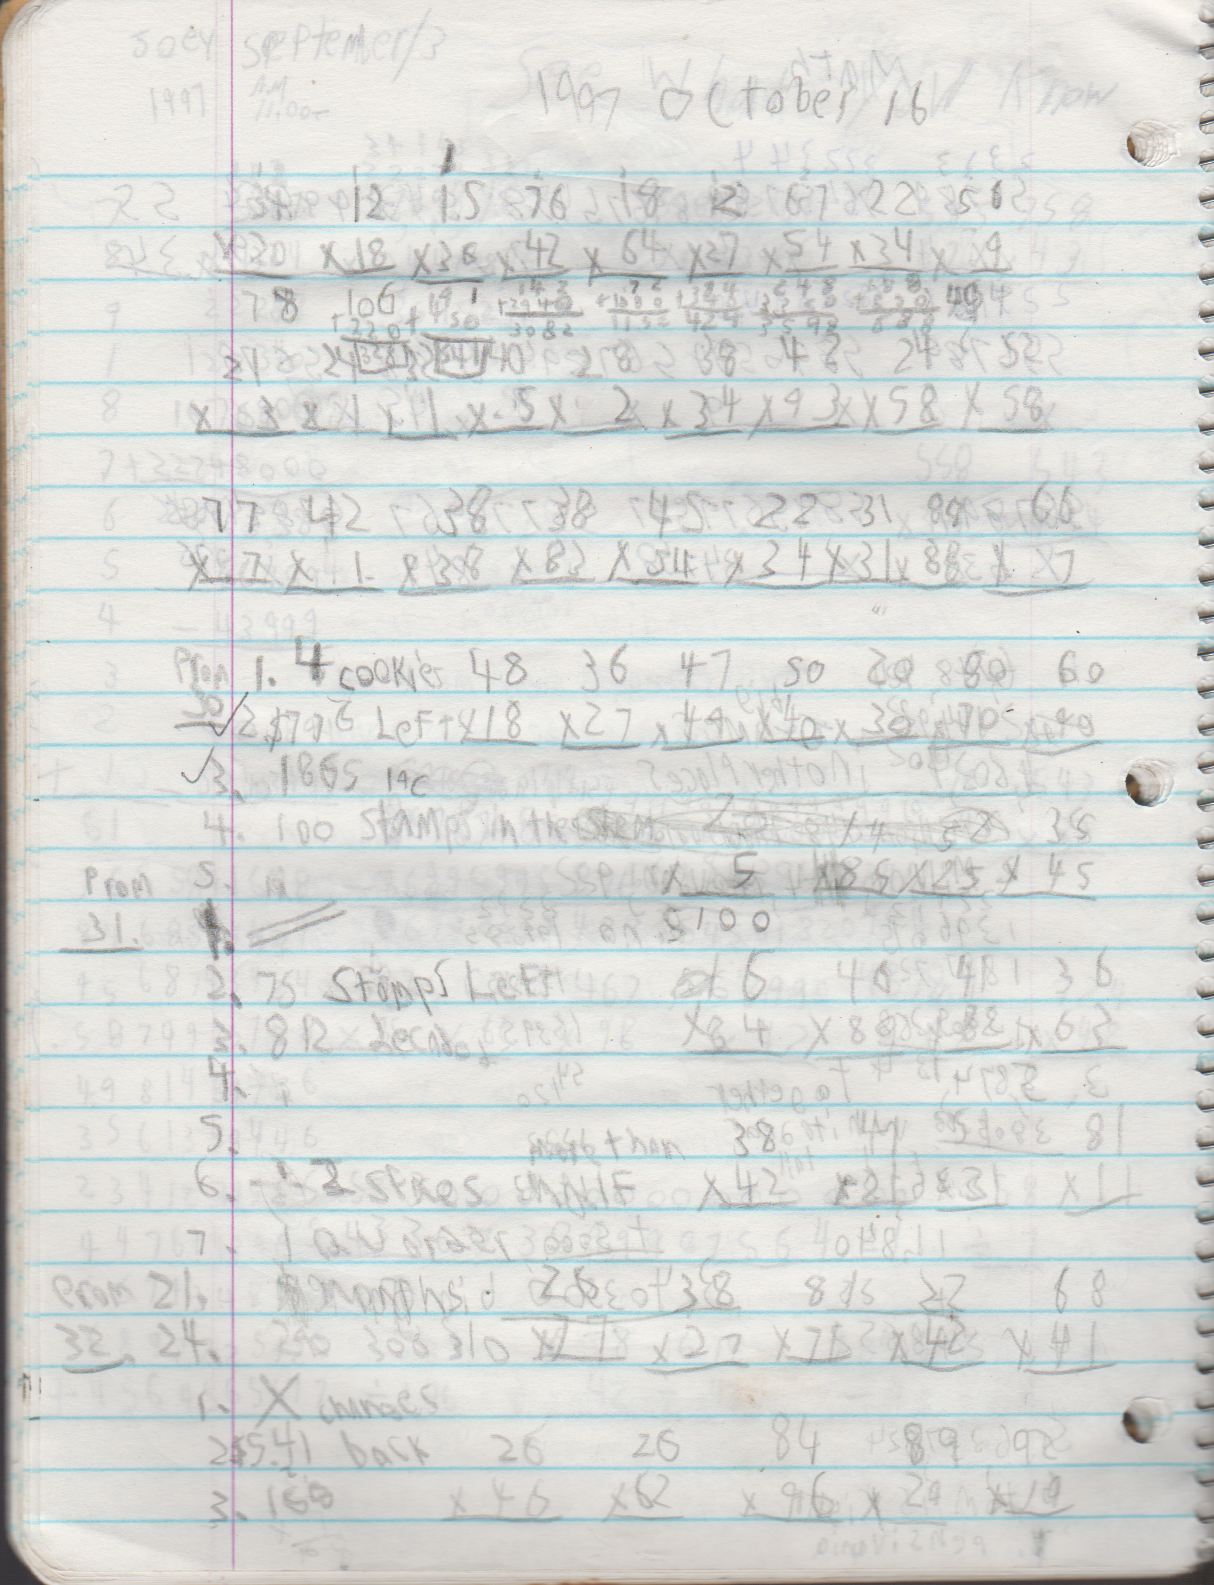 1996-08-18 - Saturday - 11 yr old Joey Arnold's School Book, dates through to 1998 apx, mostly 96, Writings, Drawings, Etc-026.png